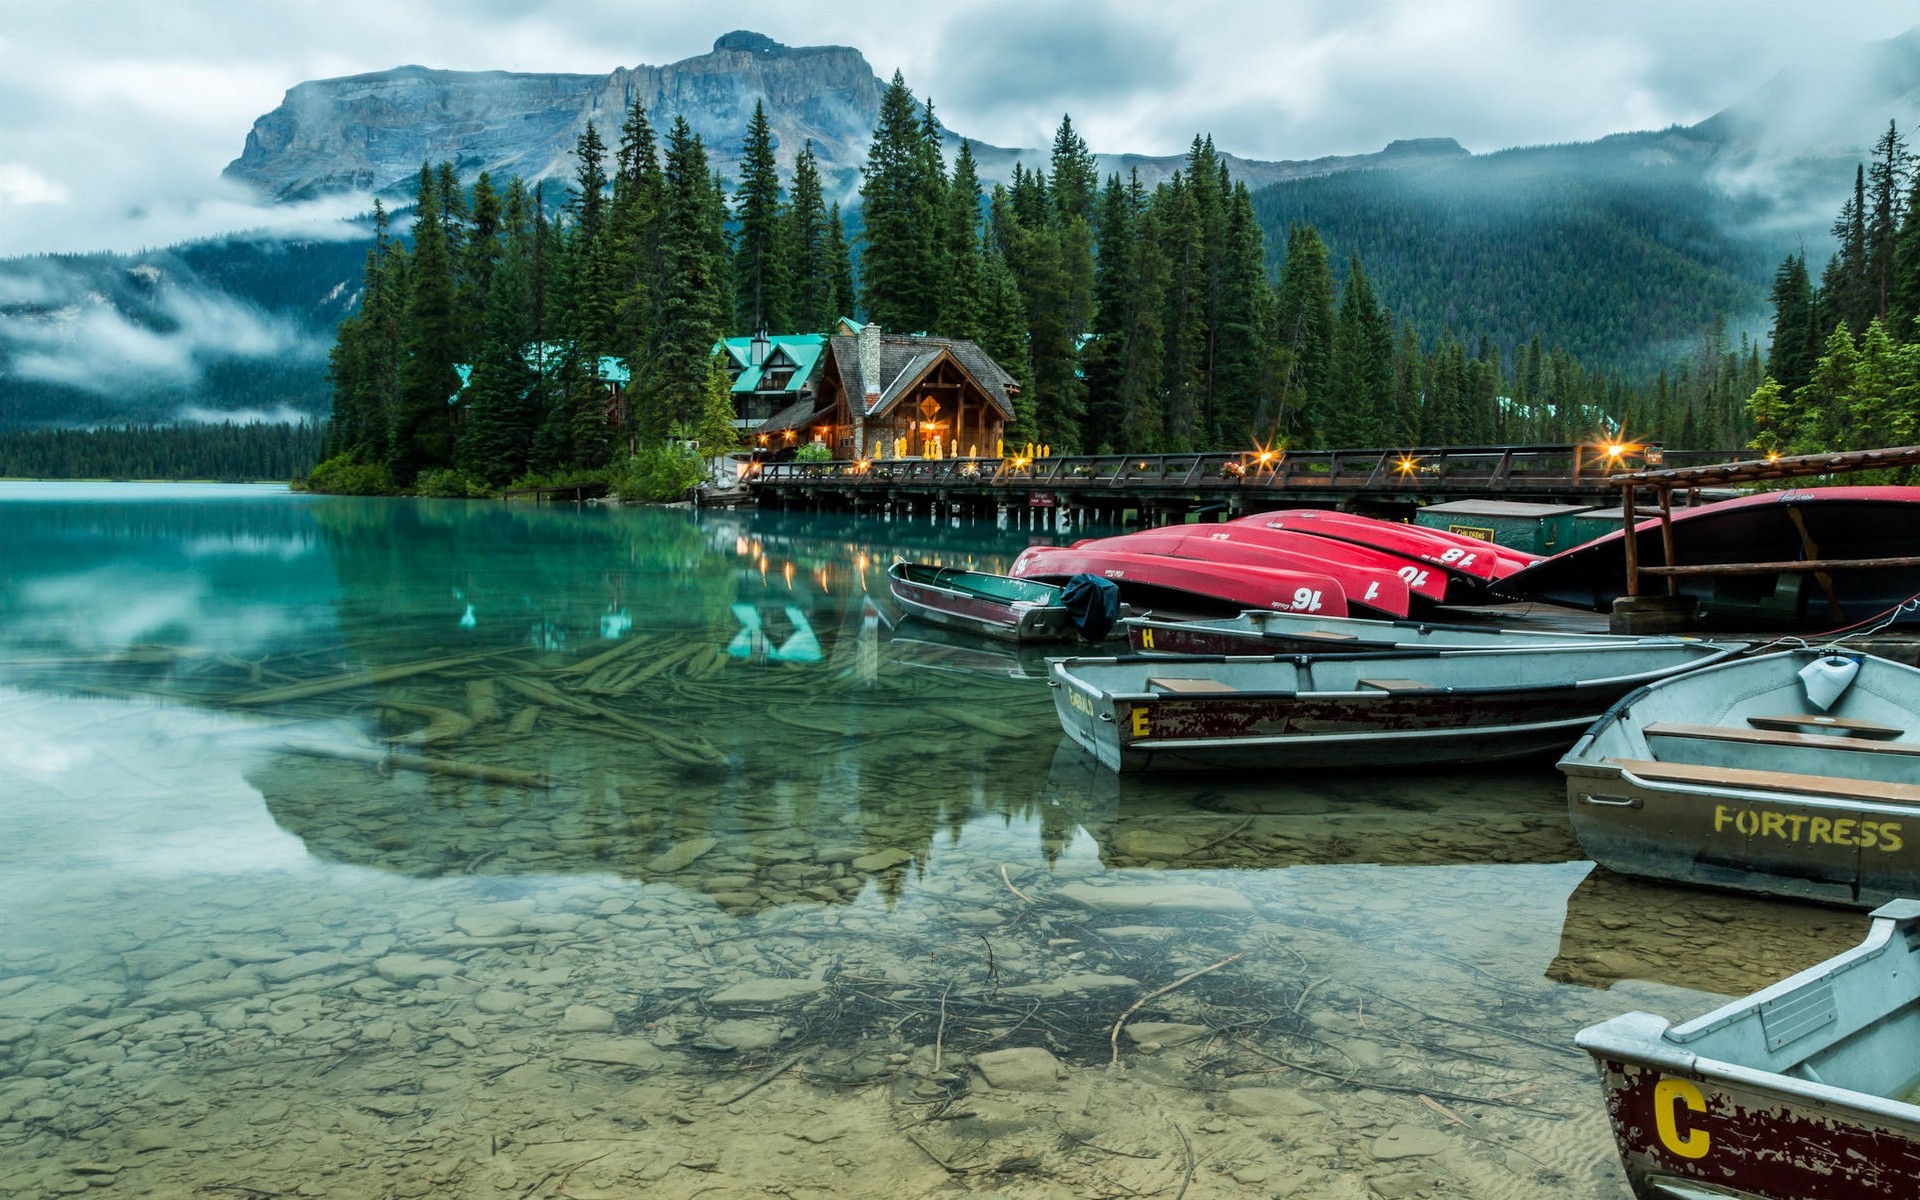 Nature Landscape Lake Hotel Banff National Park Boat Canoes Trees Mountains Mist Forest Water 1920x1200